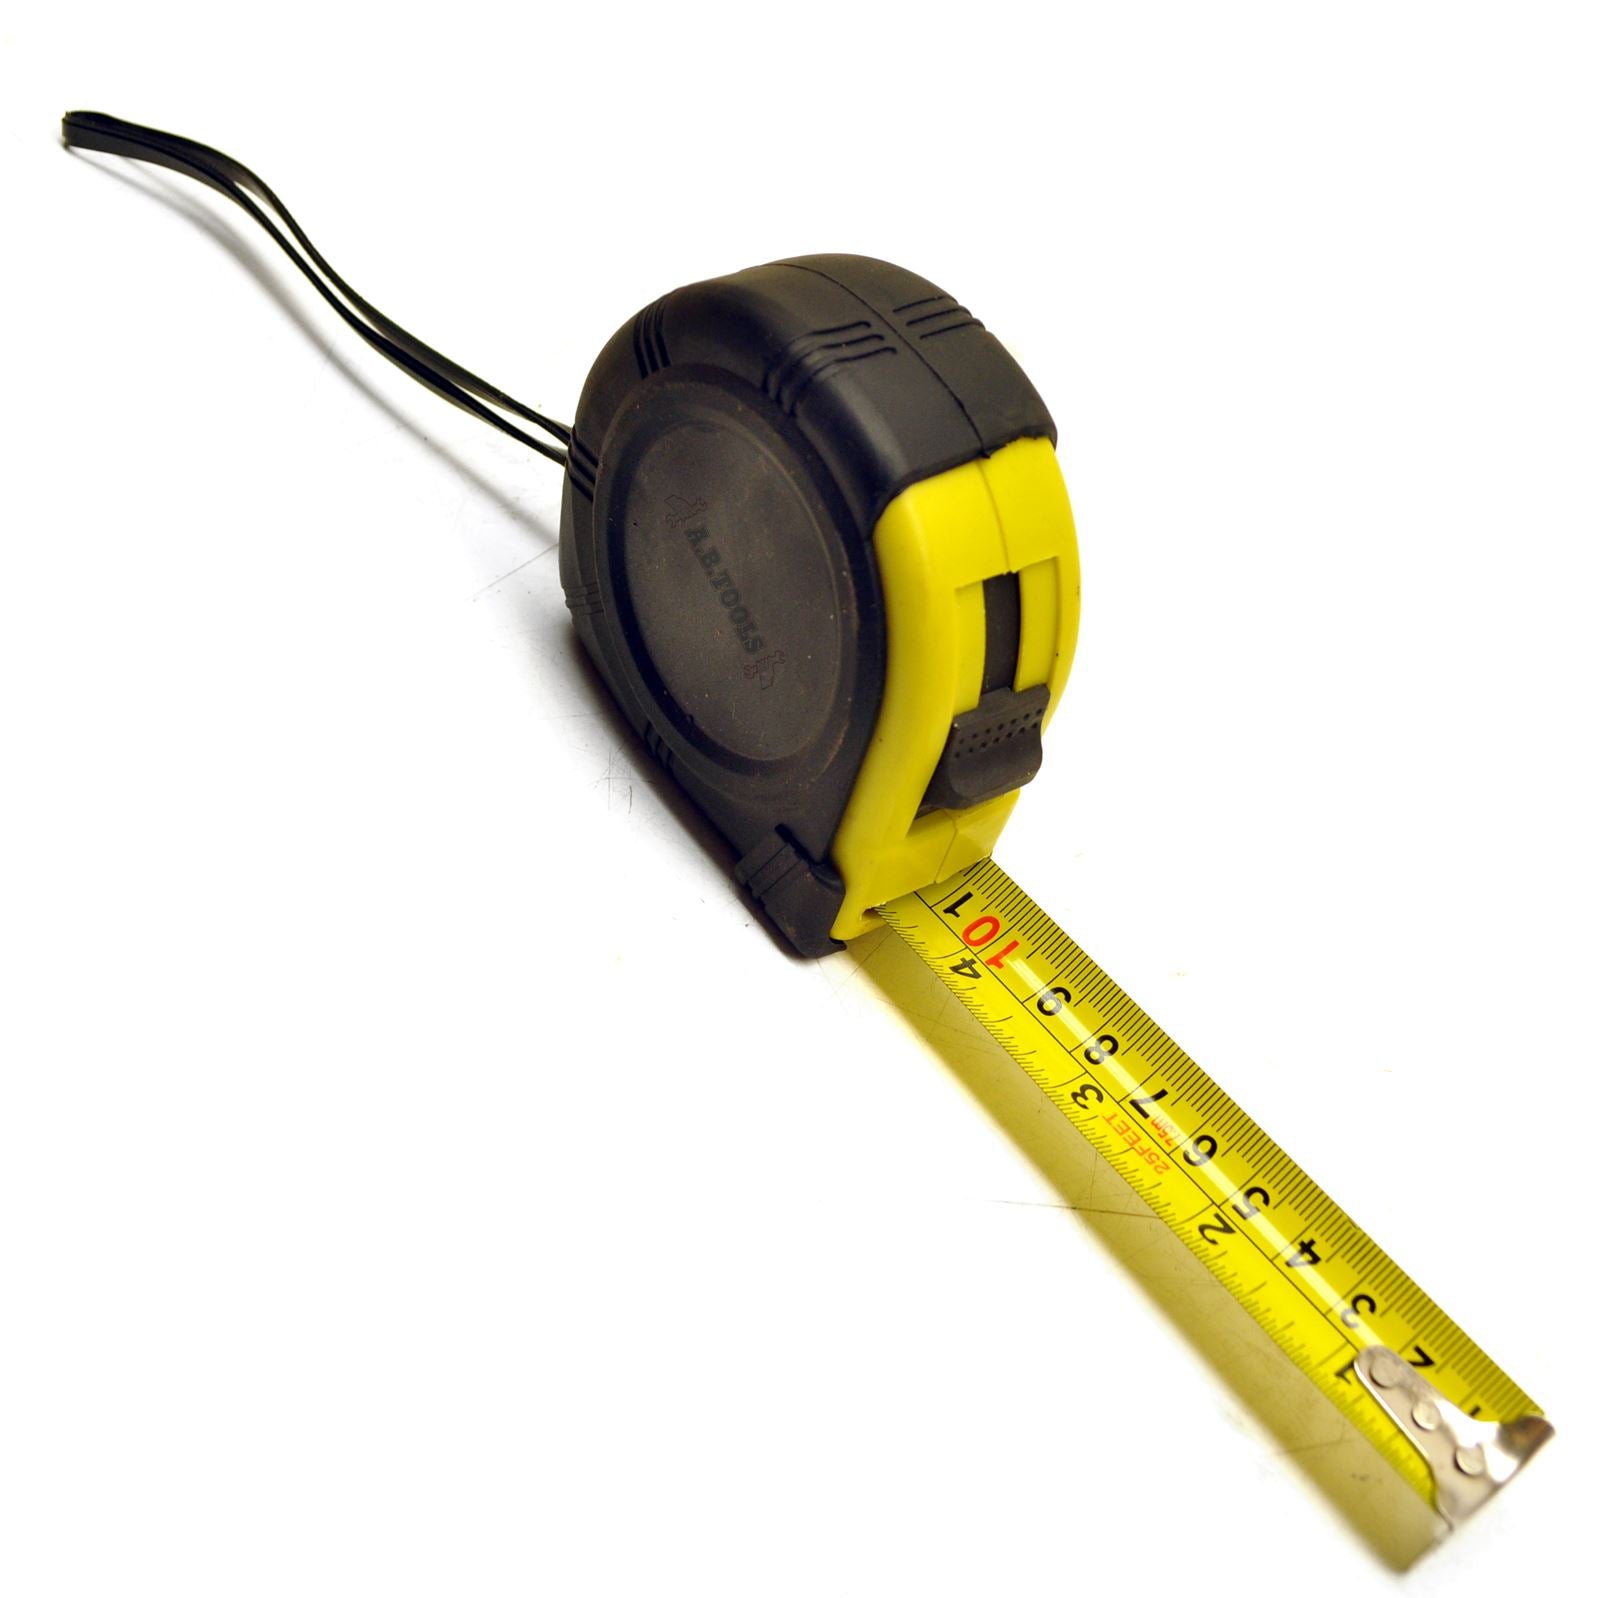 7.5 metre x 25mm Tape Measure Measuring Tape Rubber Coated mm Imperial TE554